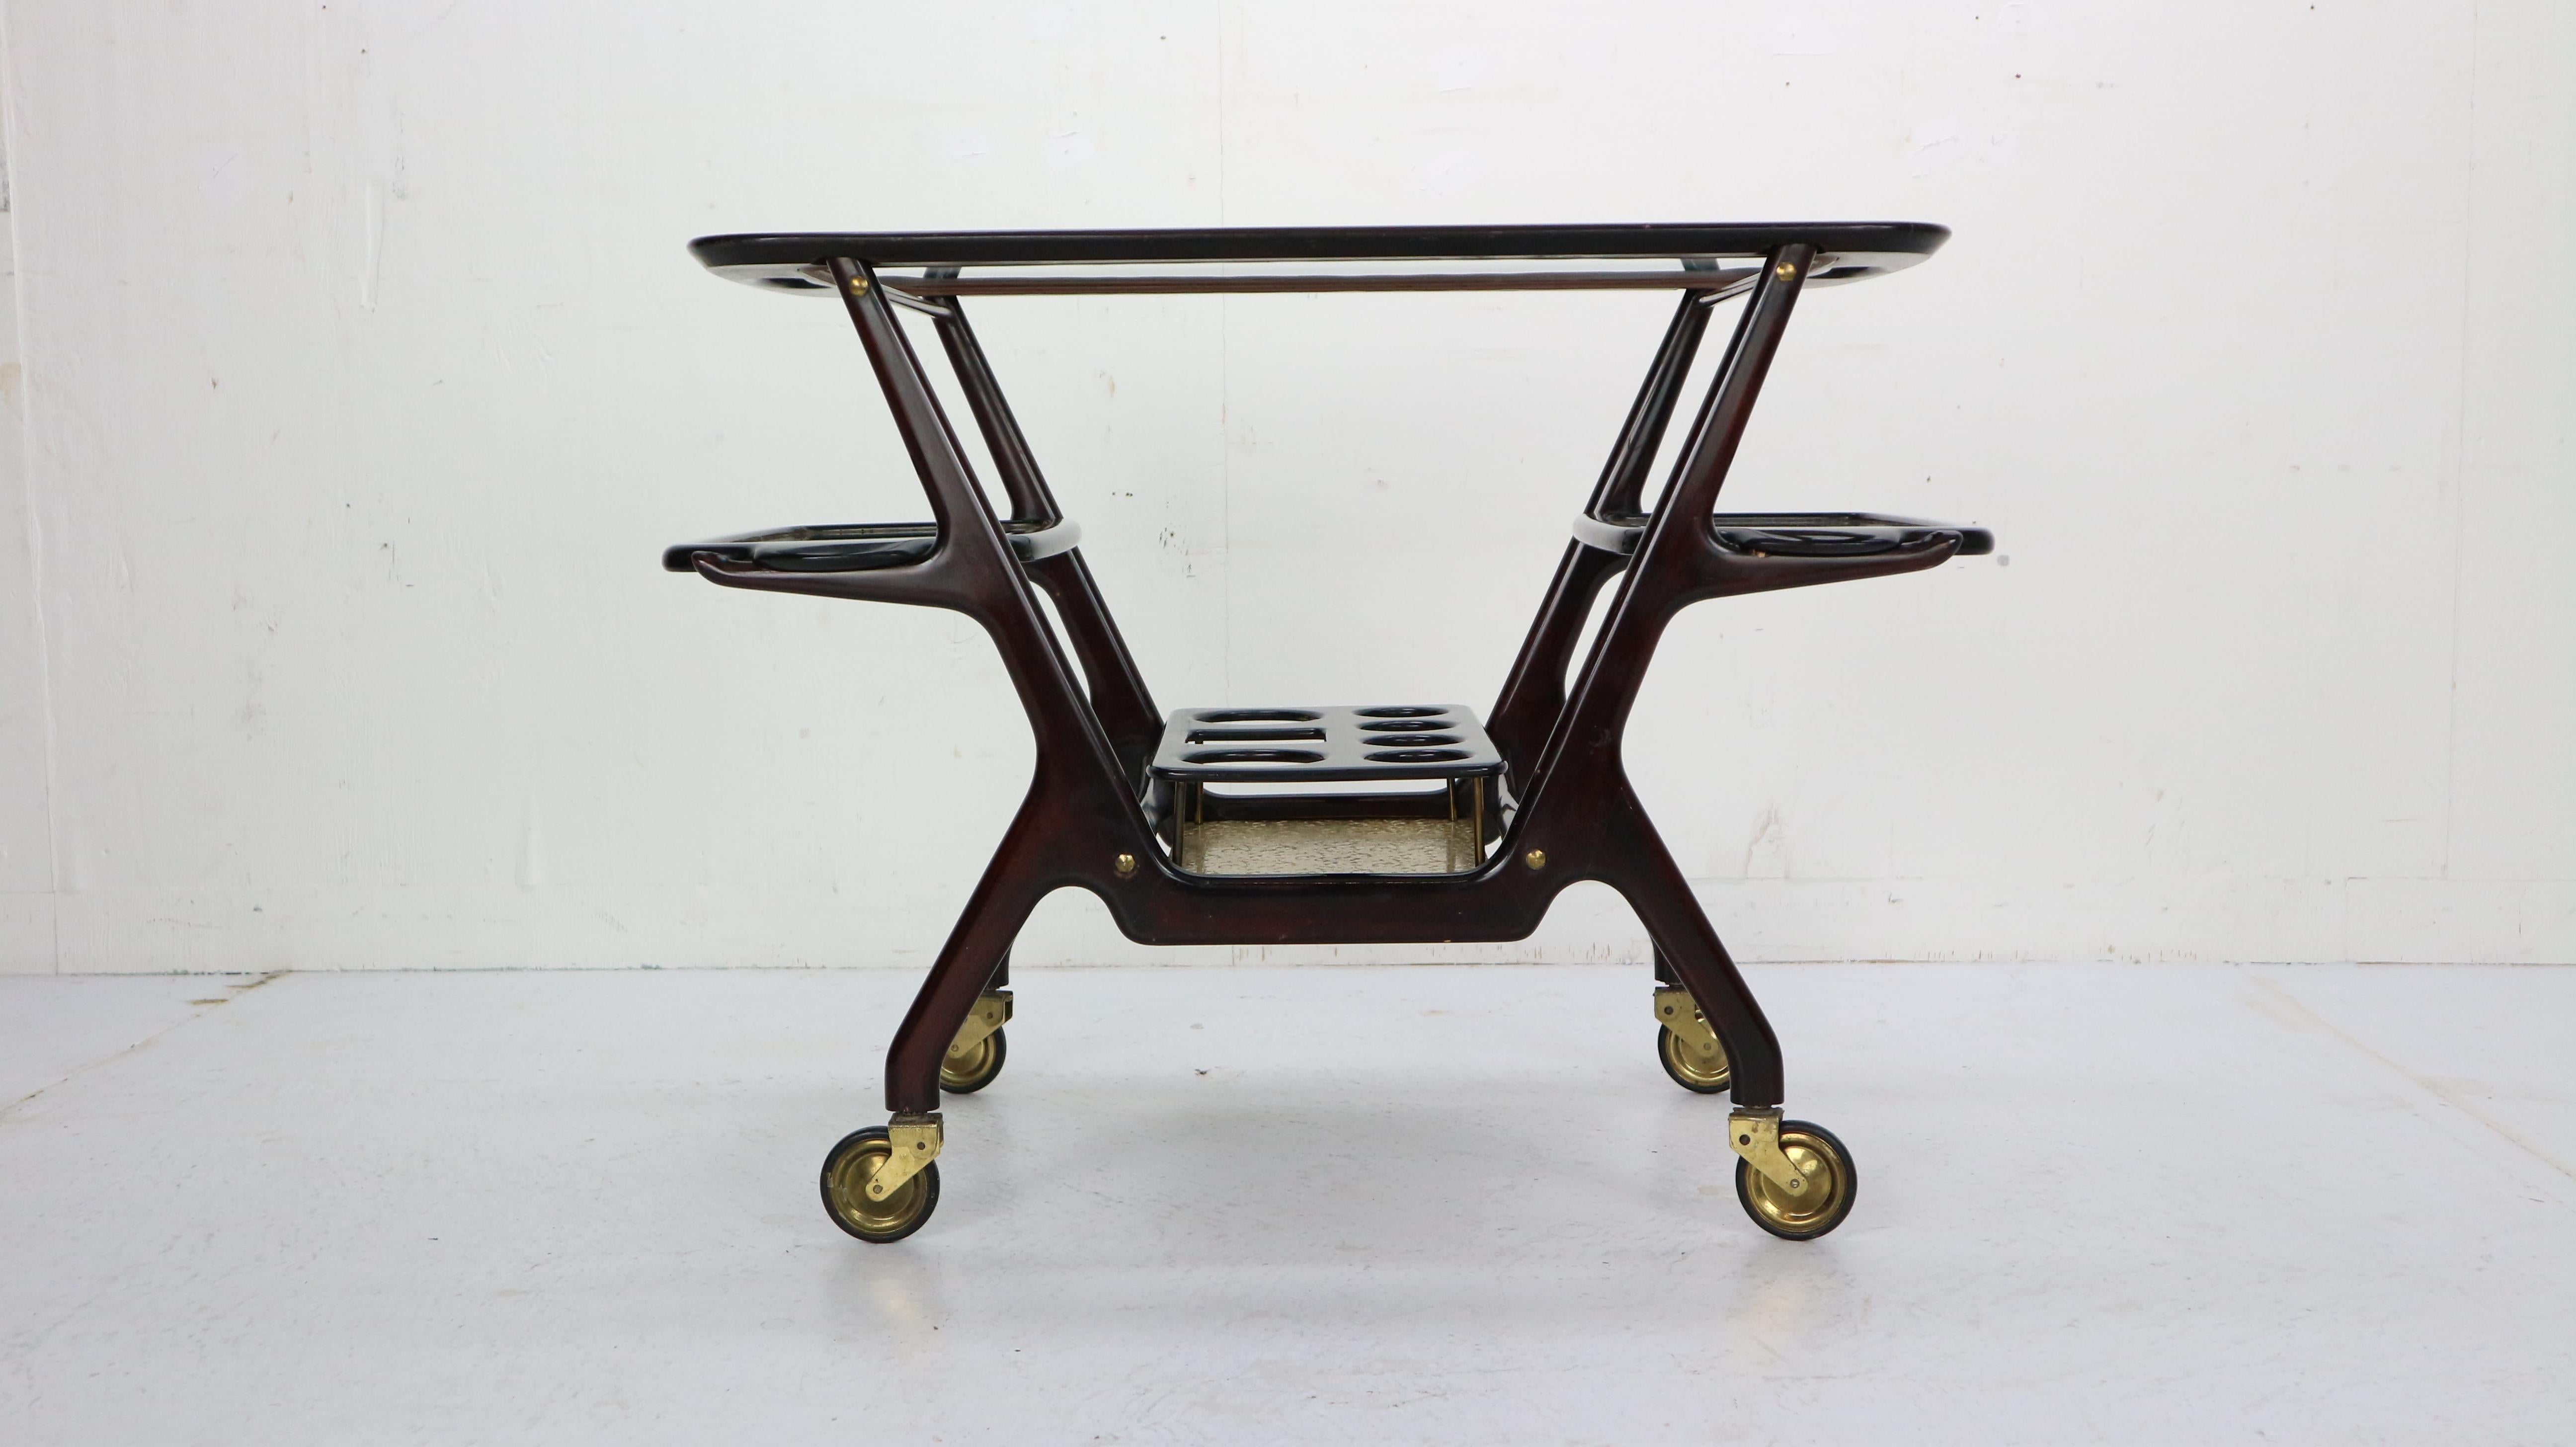 Bar cart or Serving Trolly designed by Cesare Lacca for Cassina, circa 1950s, Italy.
An ebonized mahogany wood bar cart with three removable glass trays, brass fittings and wheels. Elegant Italian Modern peace of furniture for your home or